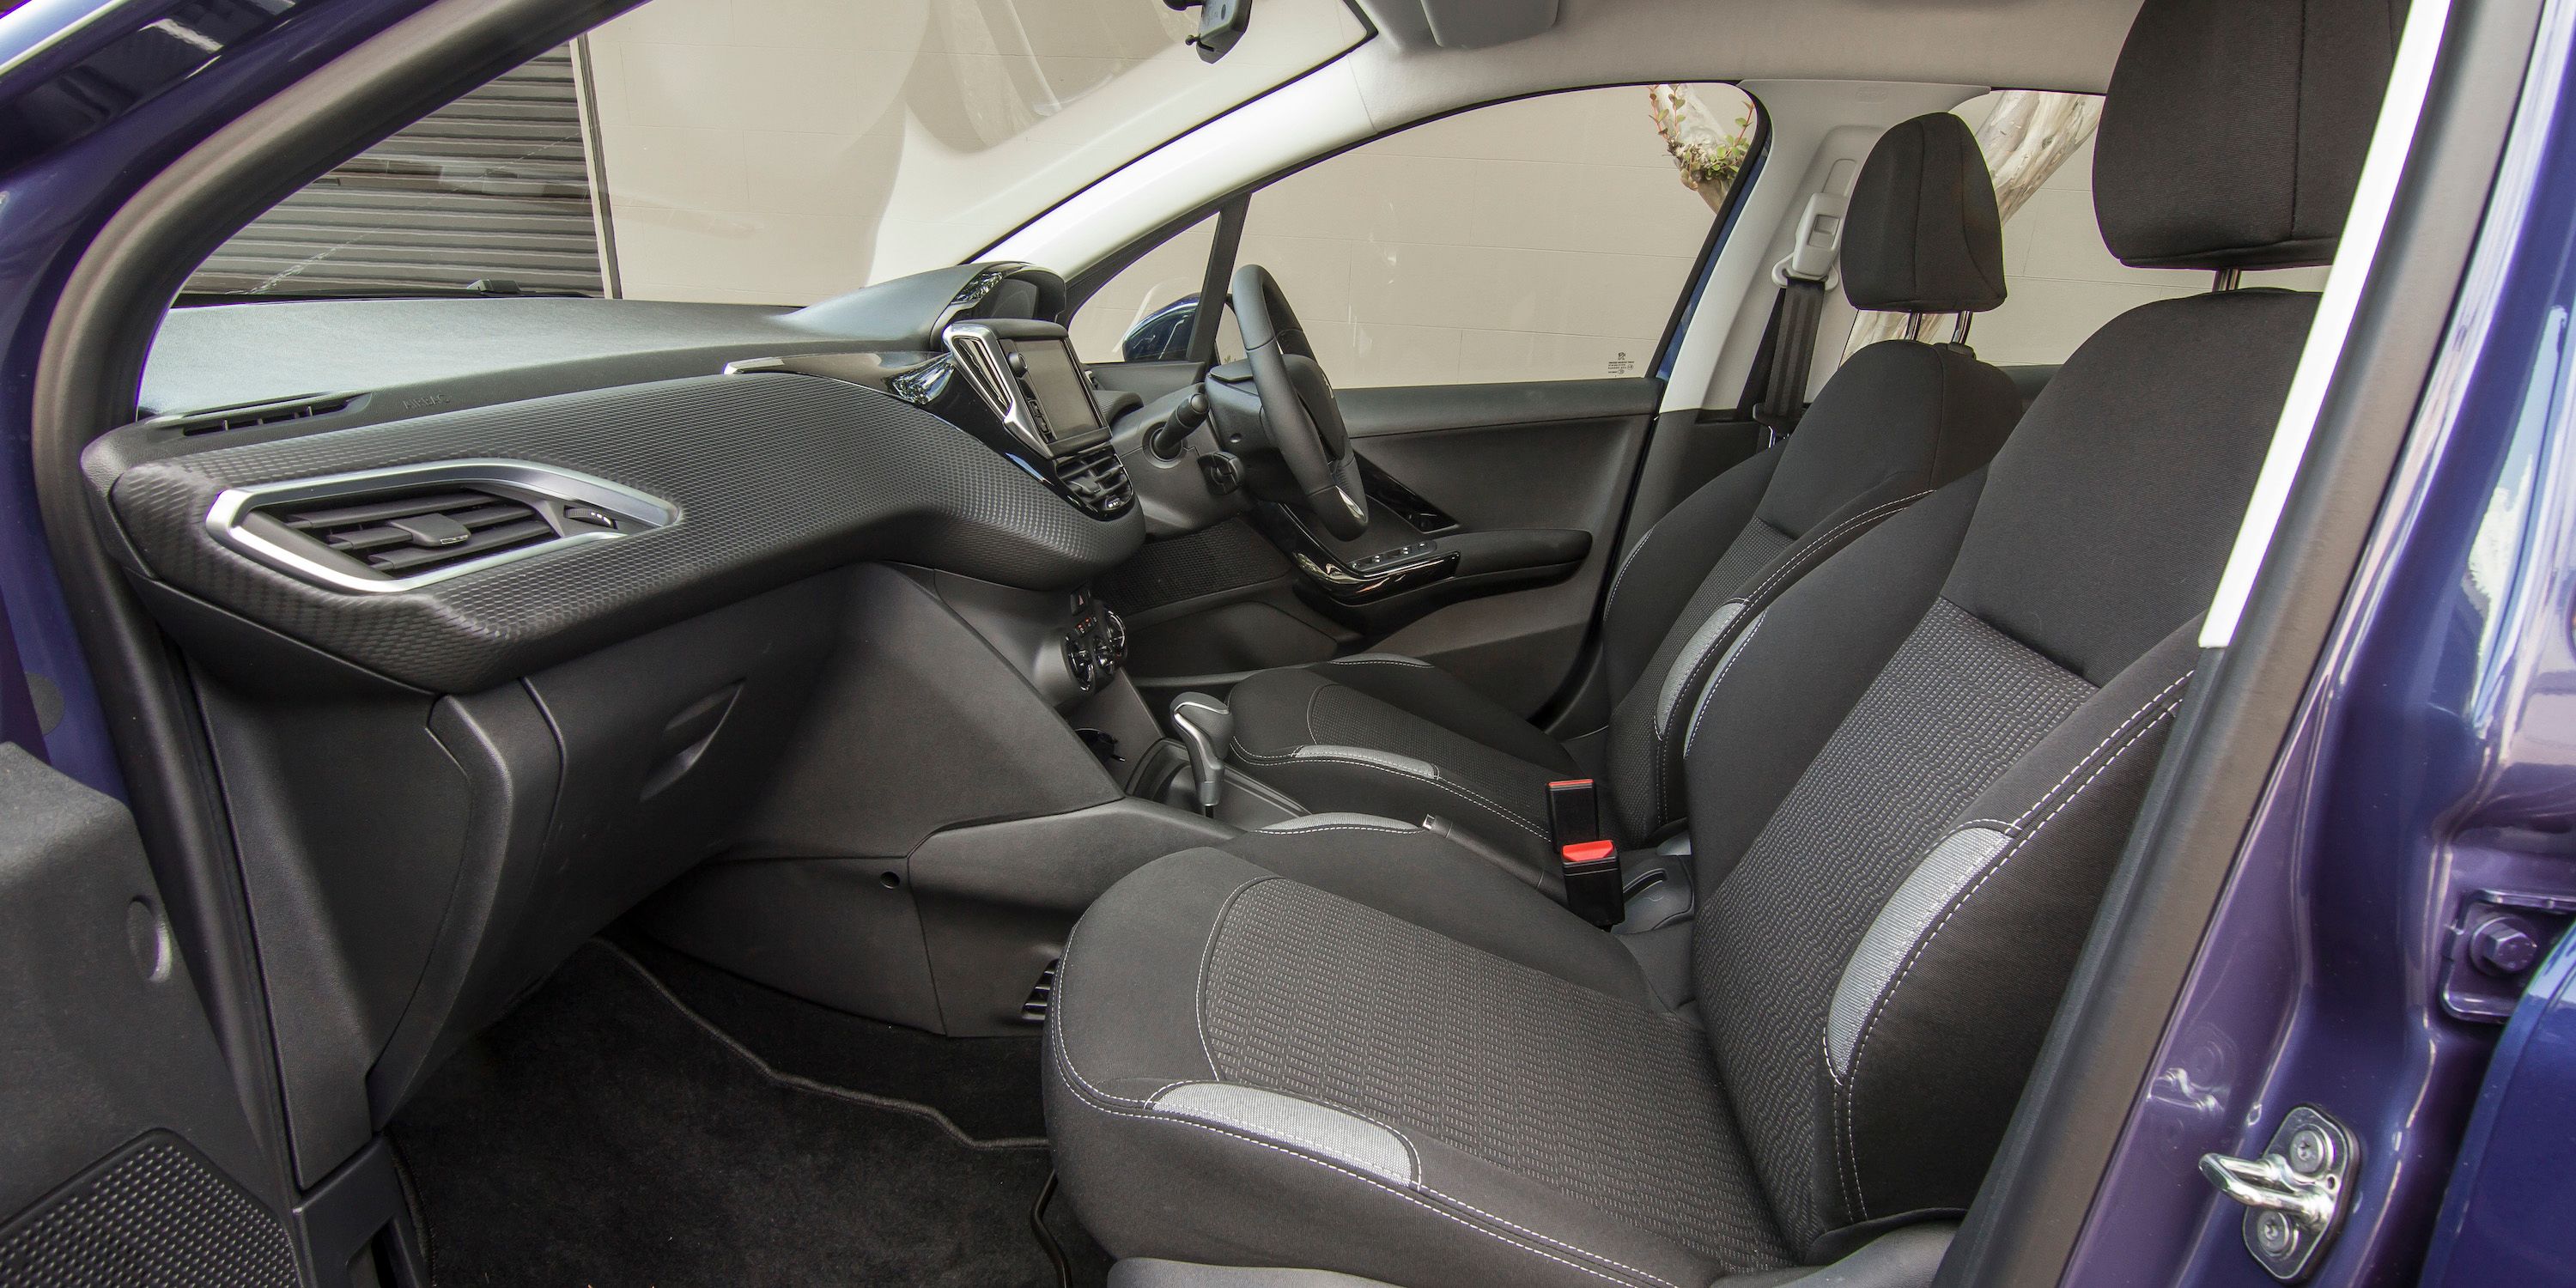 2016 Peugeot 208 Active Interior Seats (View 16 of 16)